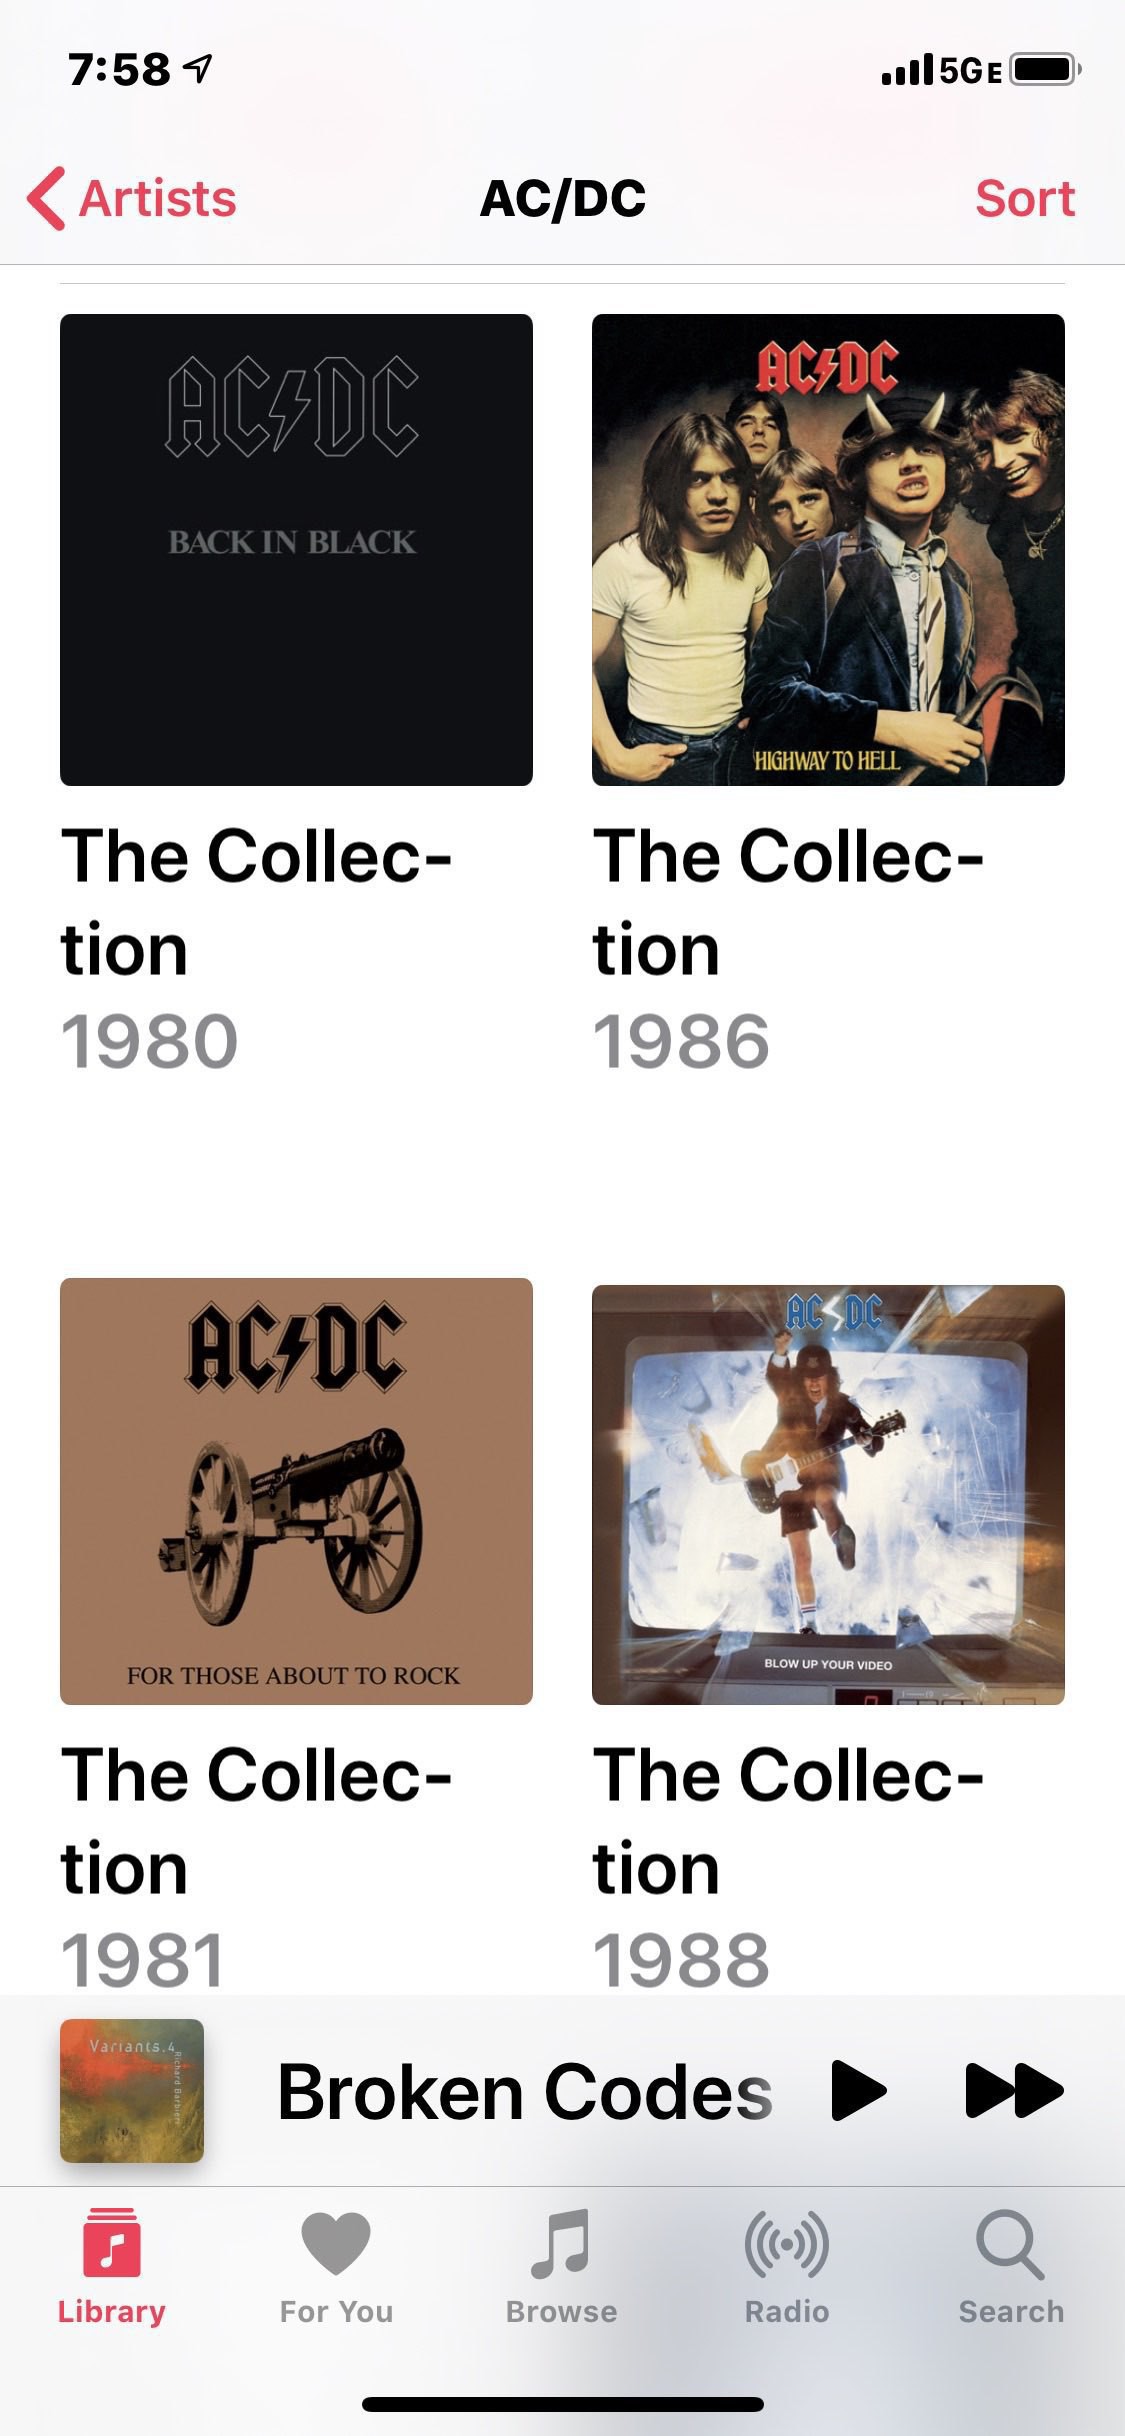 AC/DC albums all named "The Collection"